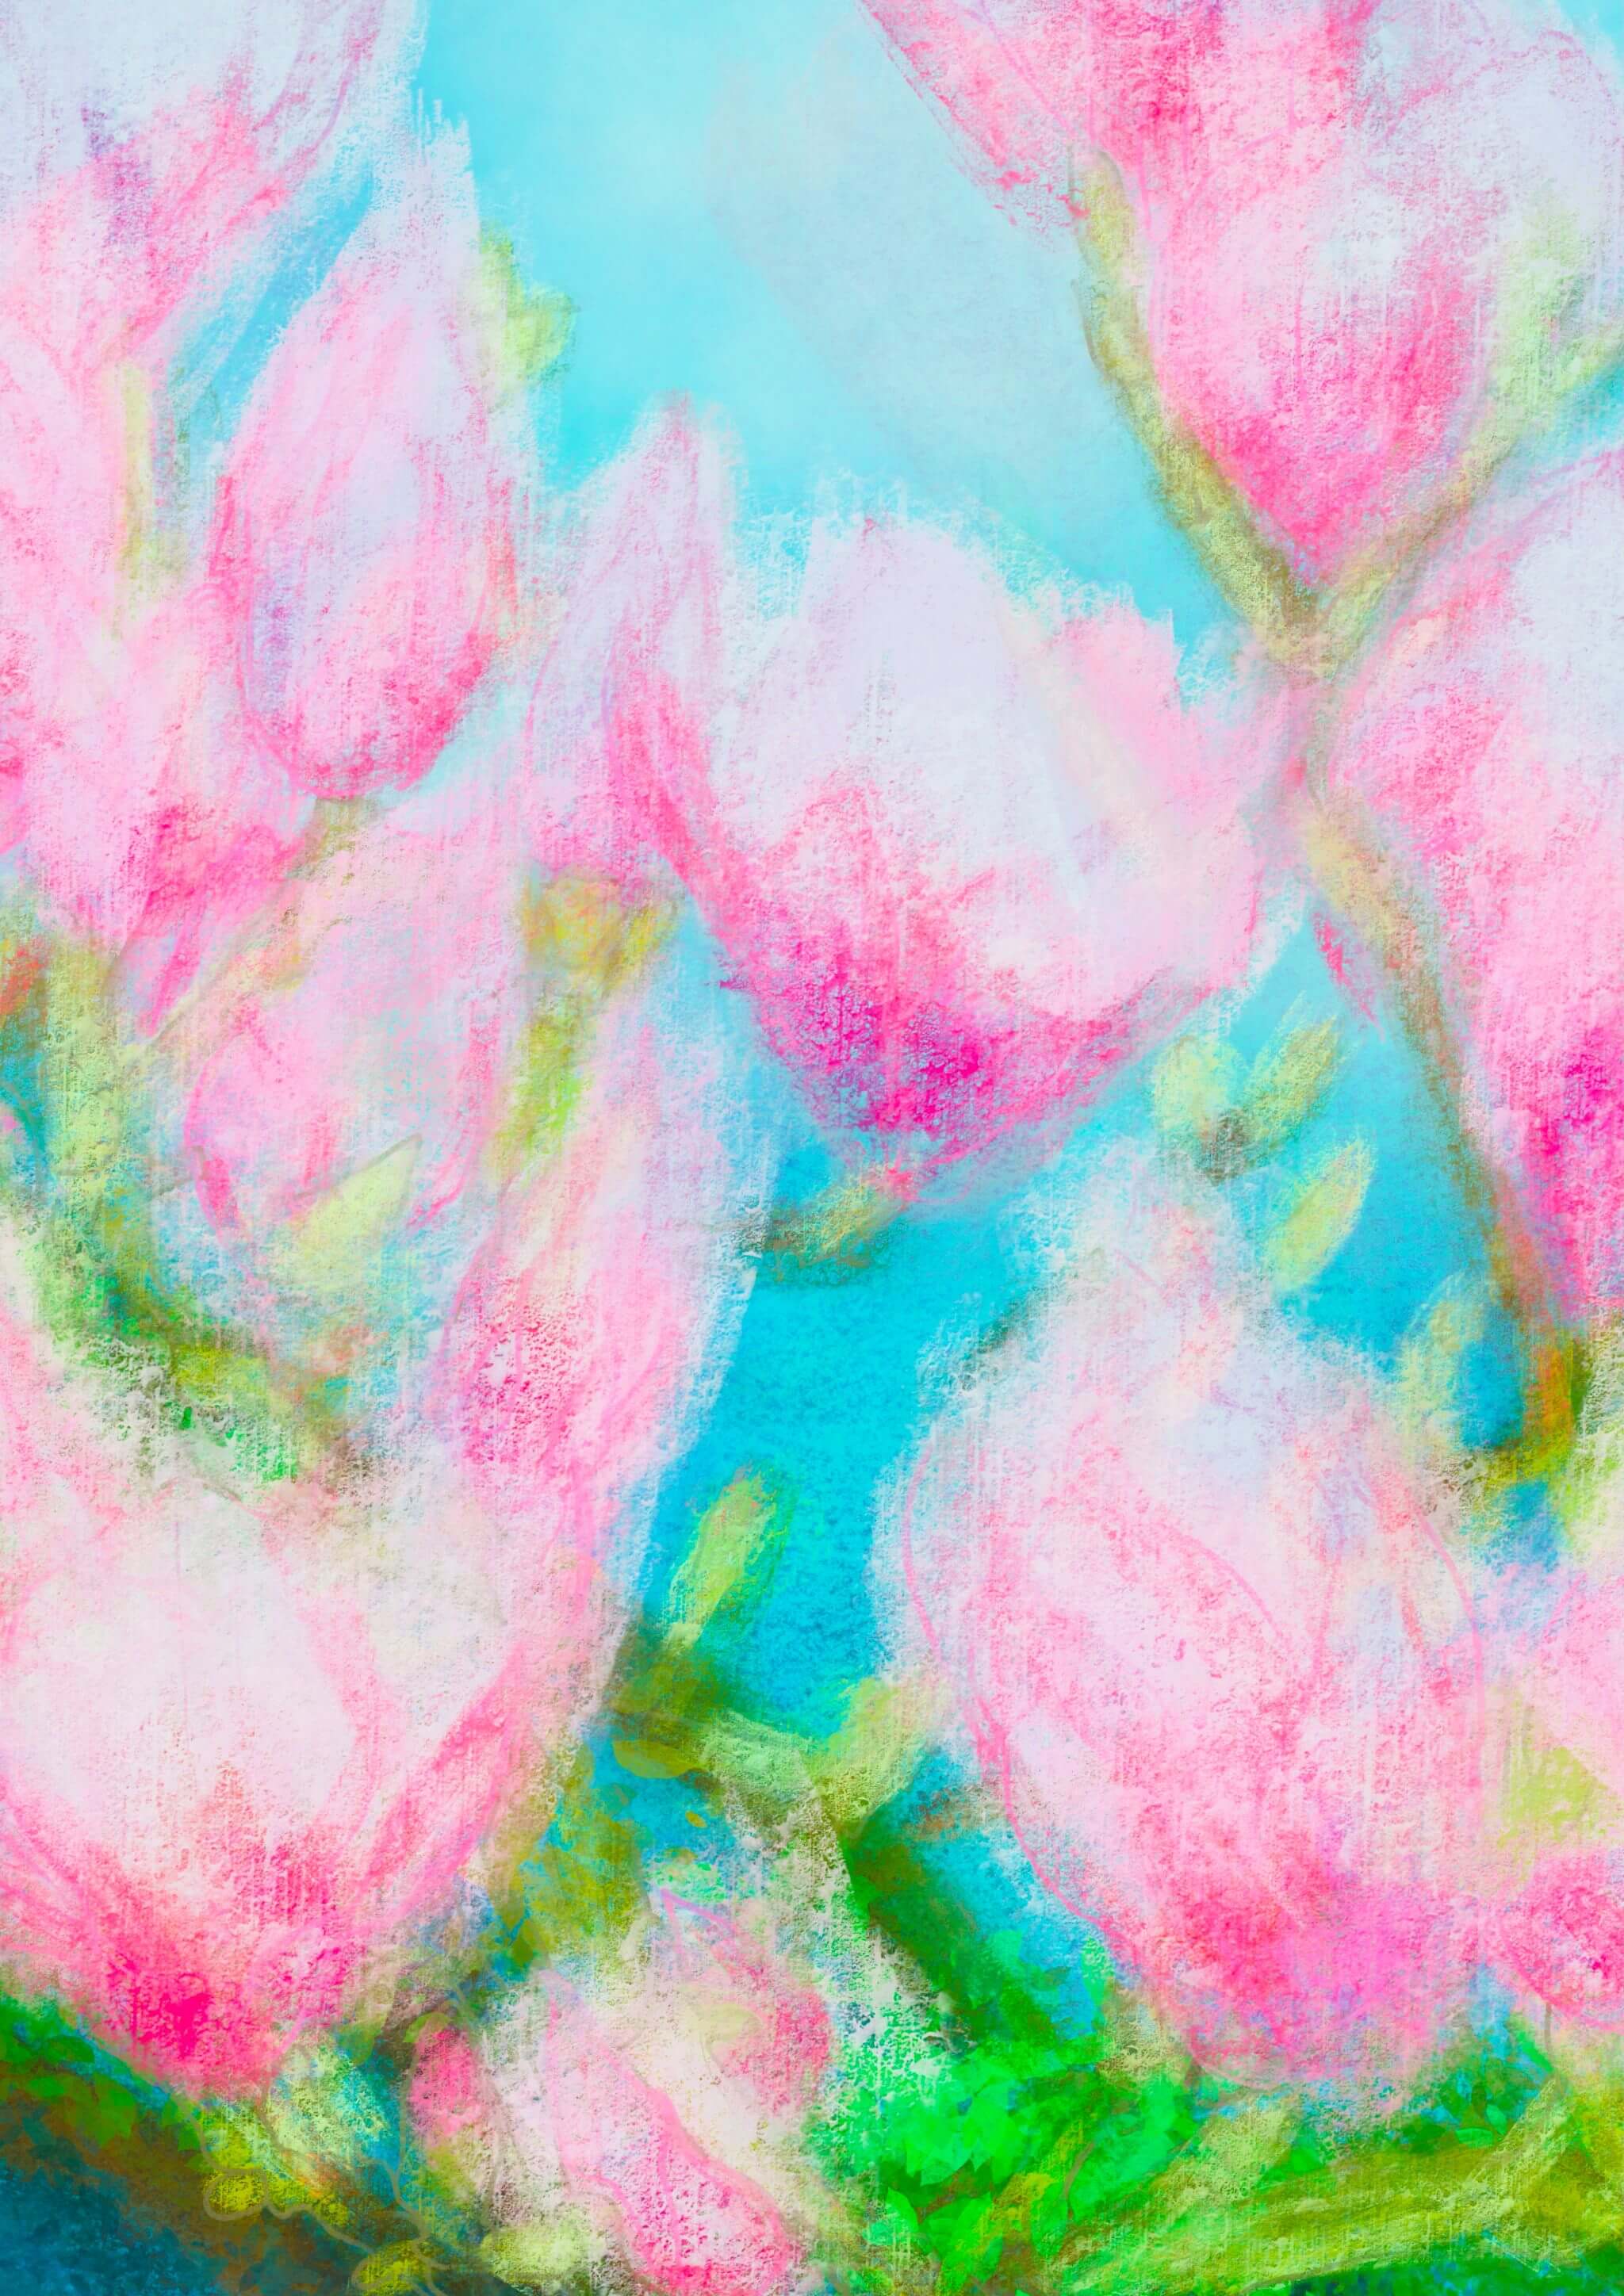 Scent of magnolias-floral abstract